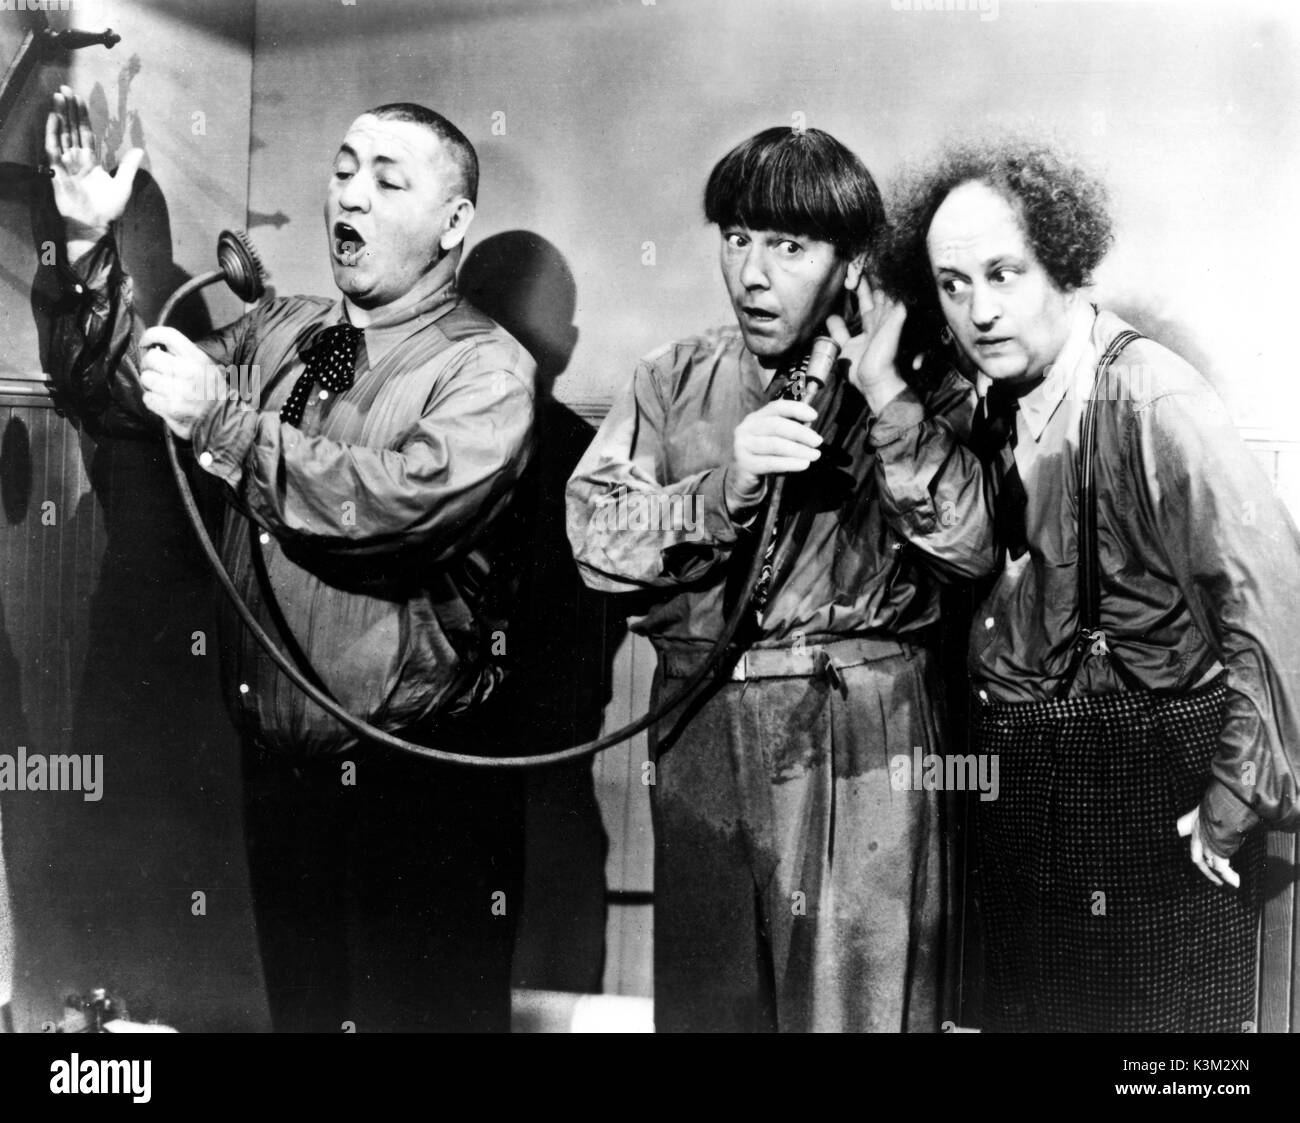 THE THREE STOOGES CURLY HOWARD, MOE HOWARD, LARRY FINE American vaudeville and screen comedy act in the early to mid C20th THE THREE STOOGES Stock Photo